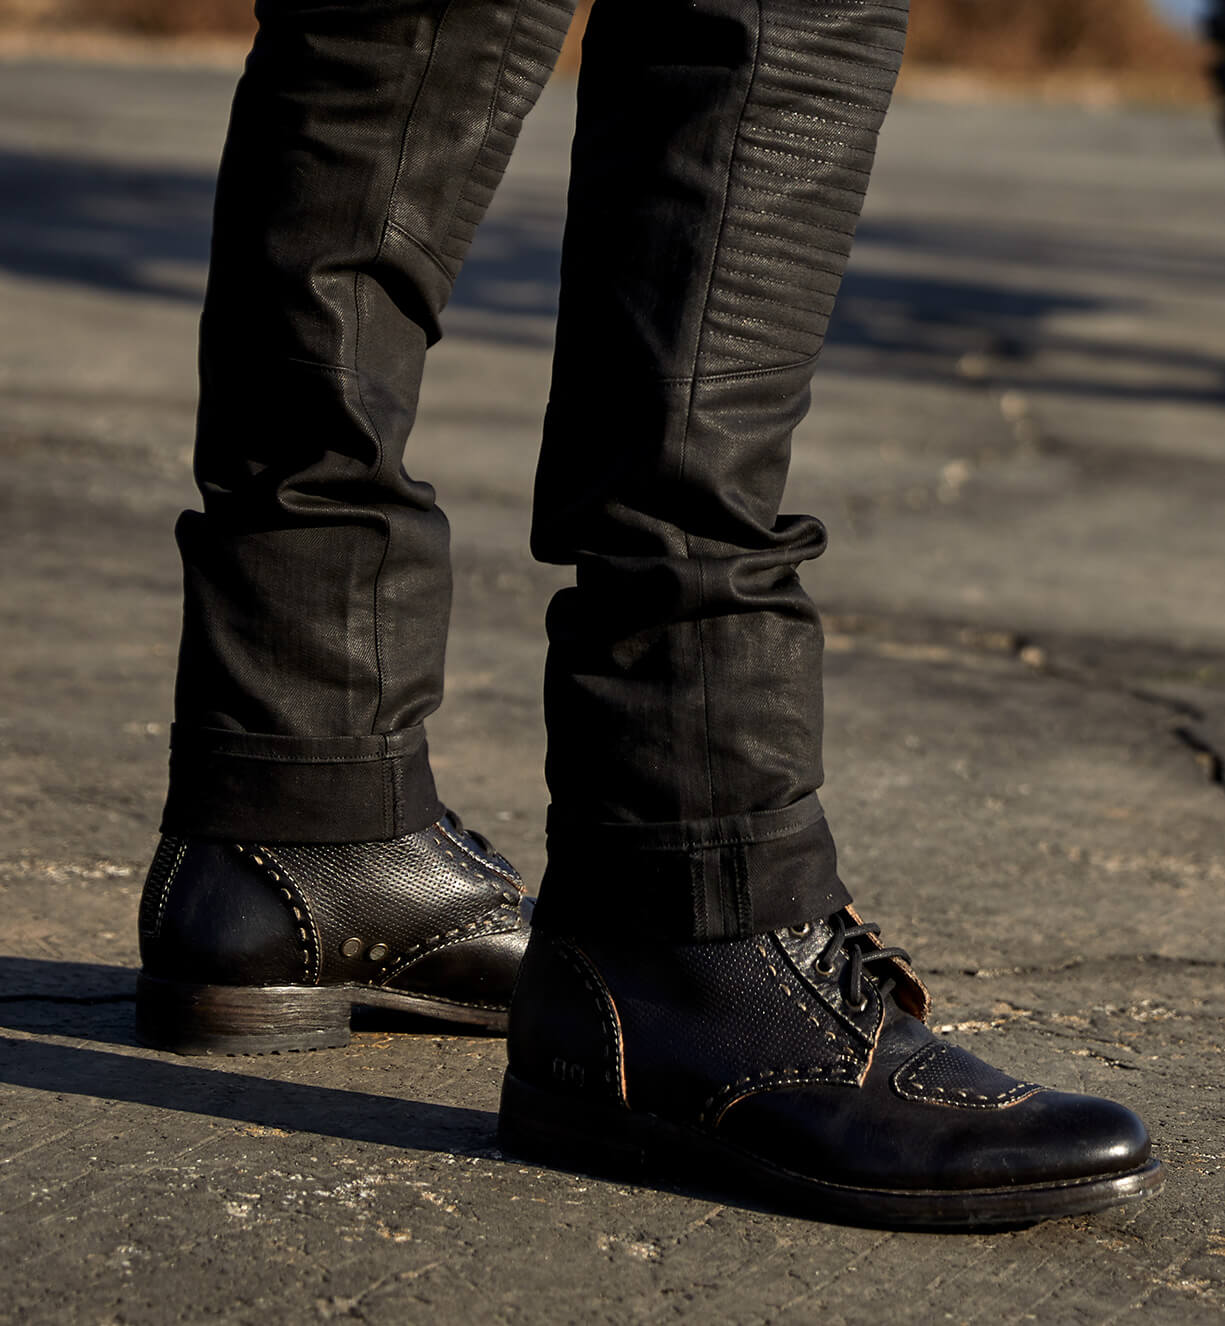 Close-up of a person wearing Bed Stu moto-inspired boots and black jeans standing on a cracked pavement.